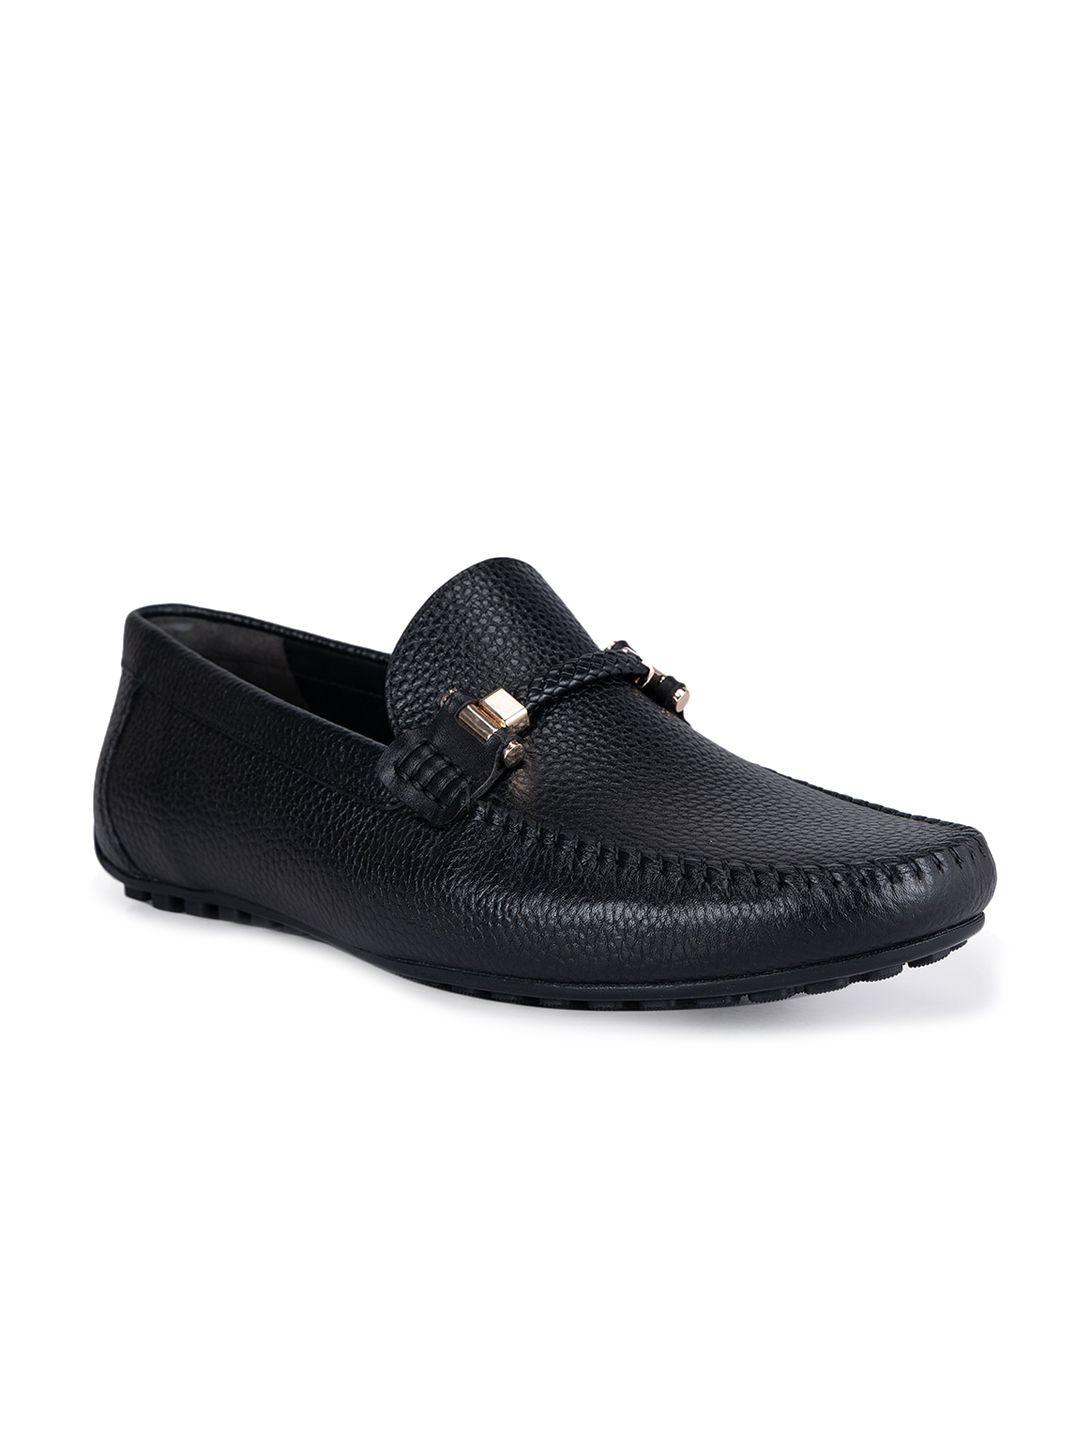 ROSSO BRUNELLO Men Textured Leather Formal Loafers